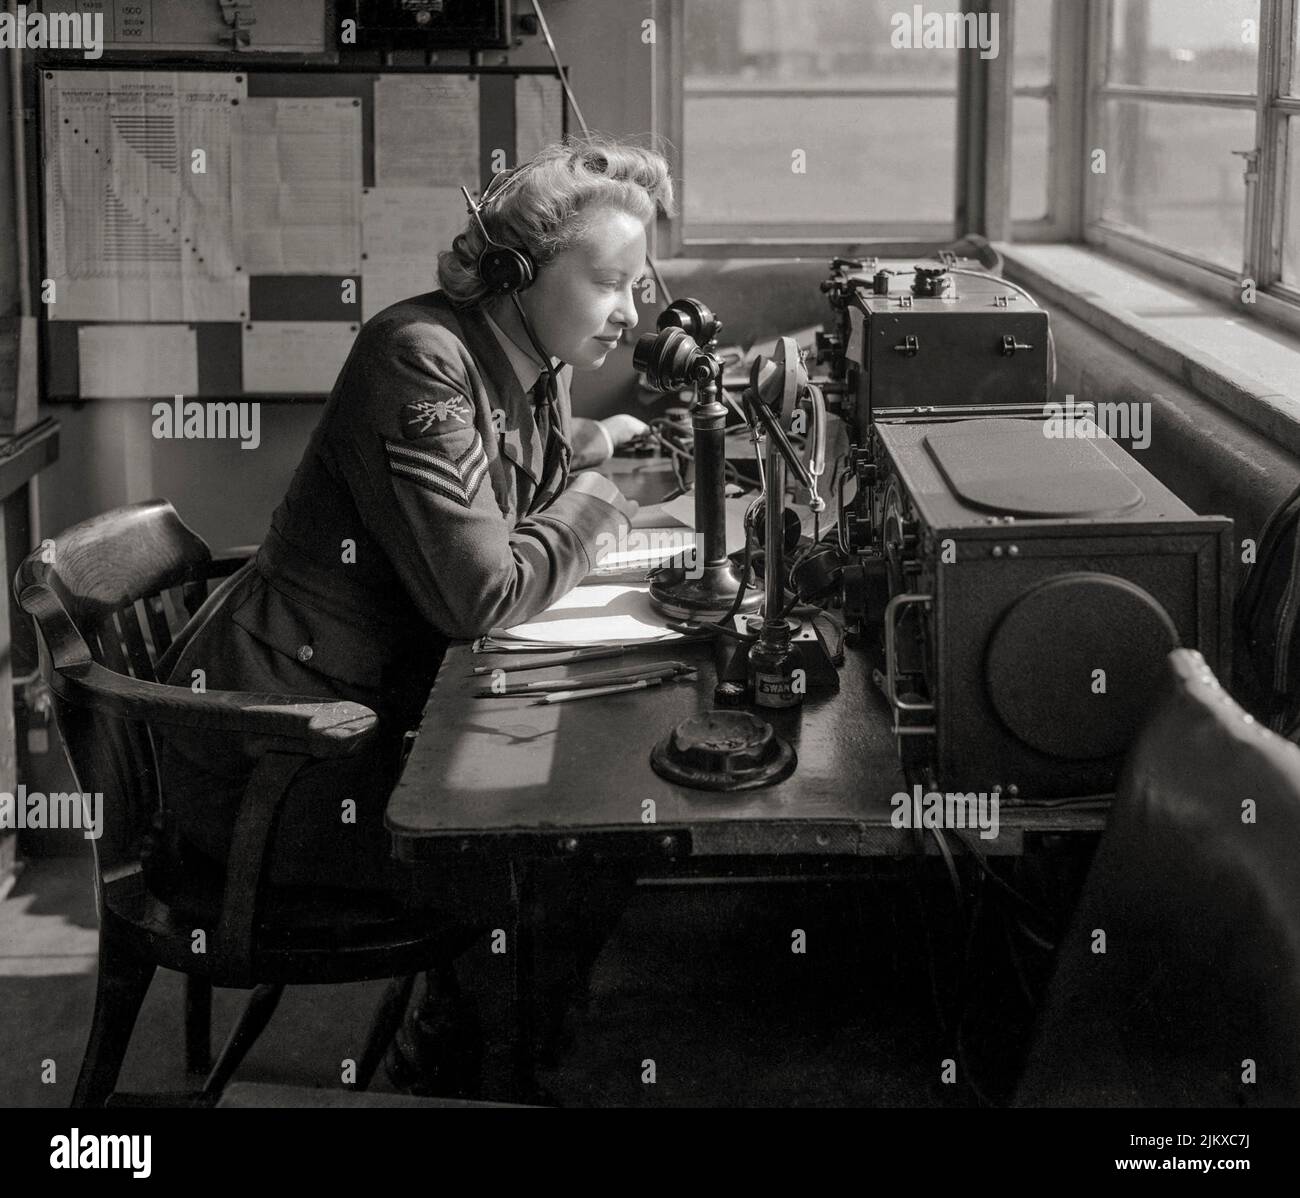 A WAAF corporal radio telephony operator communicating with aircraft from the watch office at a Bomber Command station. The WAAF was established in 1939 when the Government decided that a separate women’s air service was necessary. The WAAF was not an independent organization, nor was it completely integrated into the RAF. Rather it was interlinked with the RAF so that whenever possible RAF personnel could be substituted for women. Stock Photo